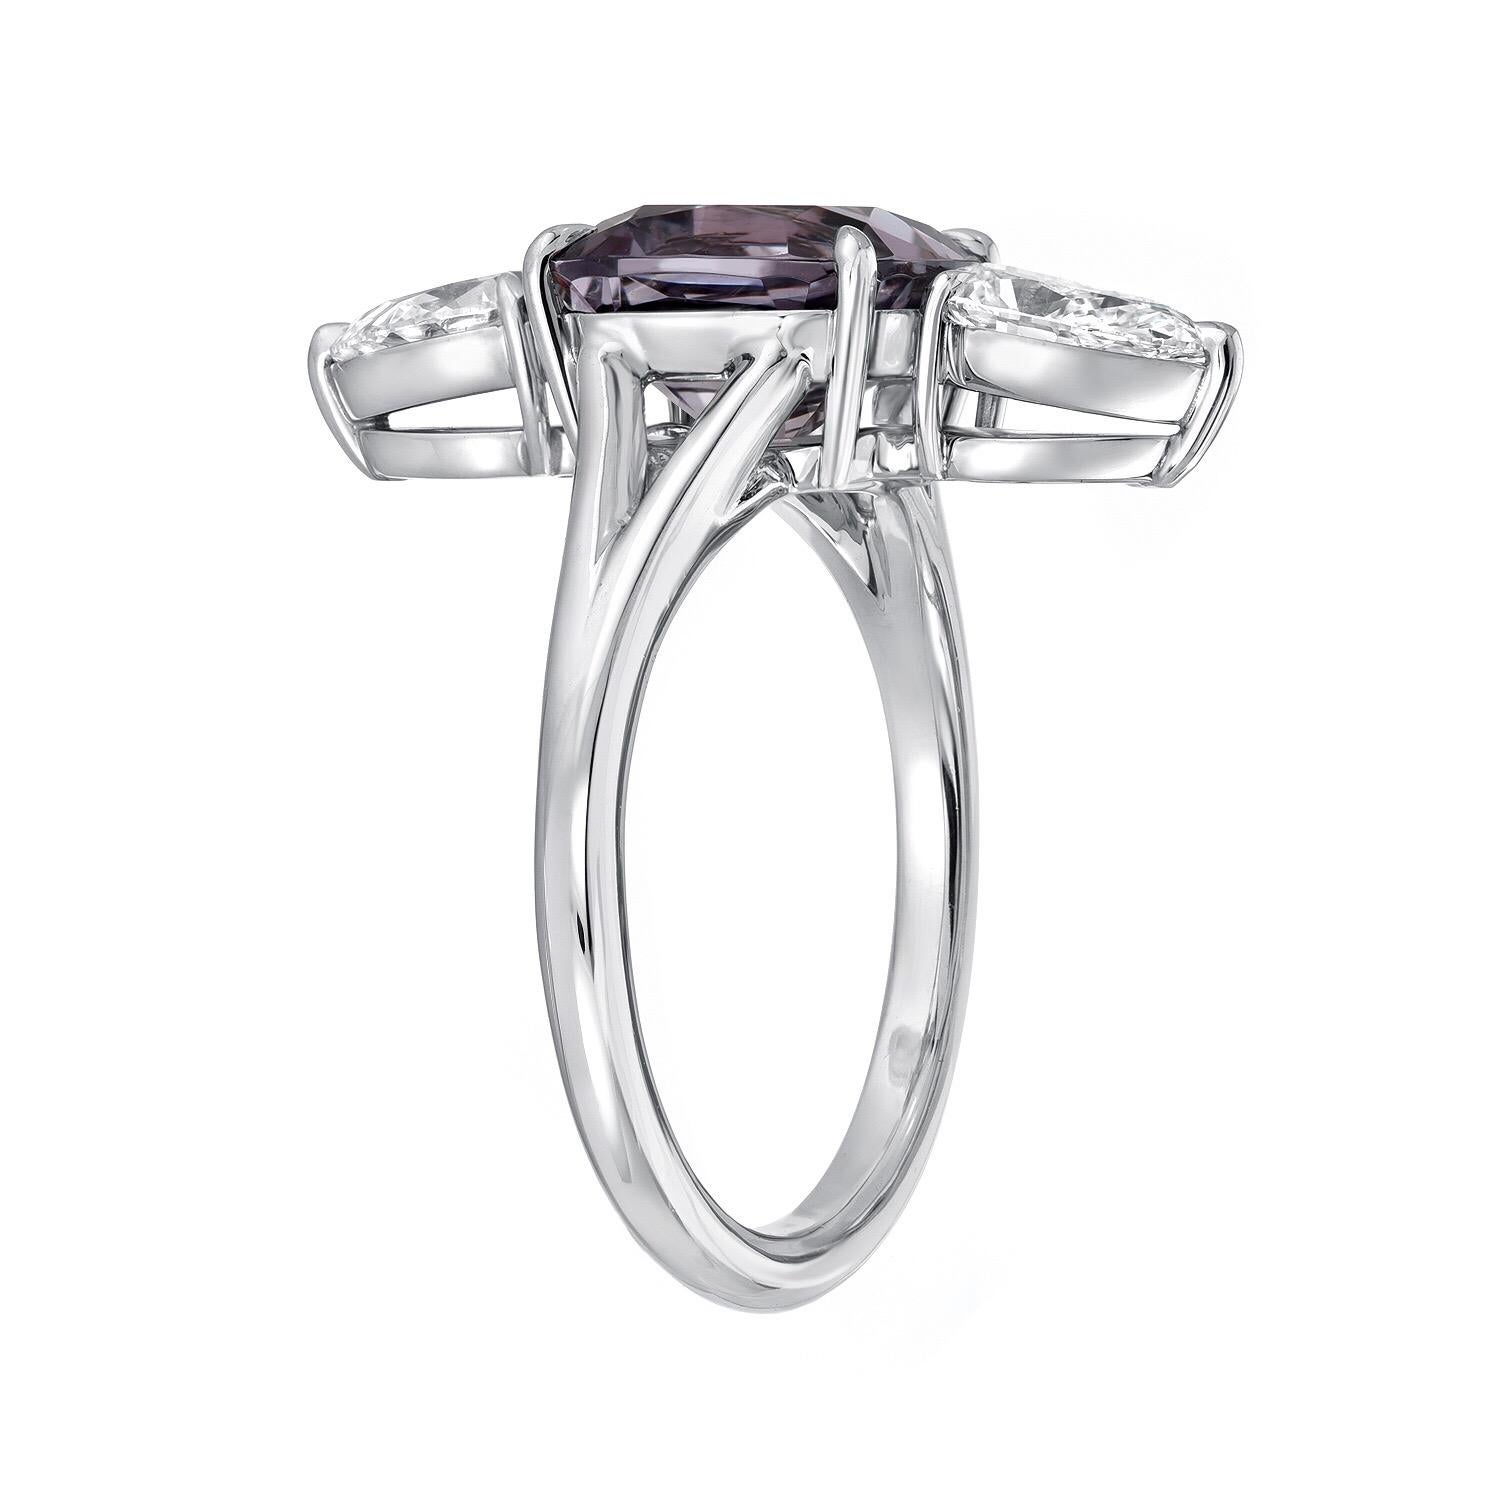 Spectacular 3.14 carat cushion cut Burma Spinel, displaying a violet hue with grayish undertones, and a pair of GIA certified F/VS1 pear shape diamonds weighing a total of 1.00 carat, are set vertically in this exquisitely hand crafted platinum